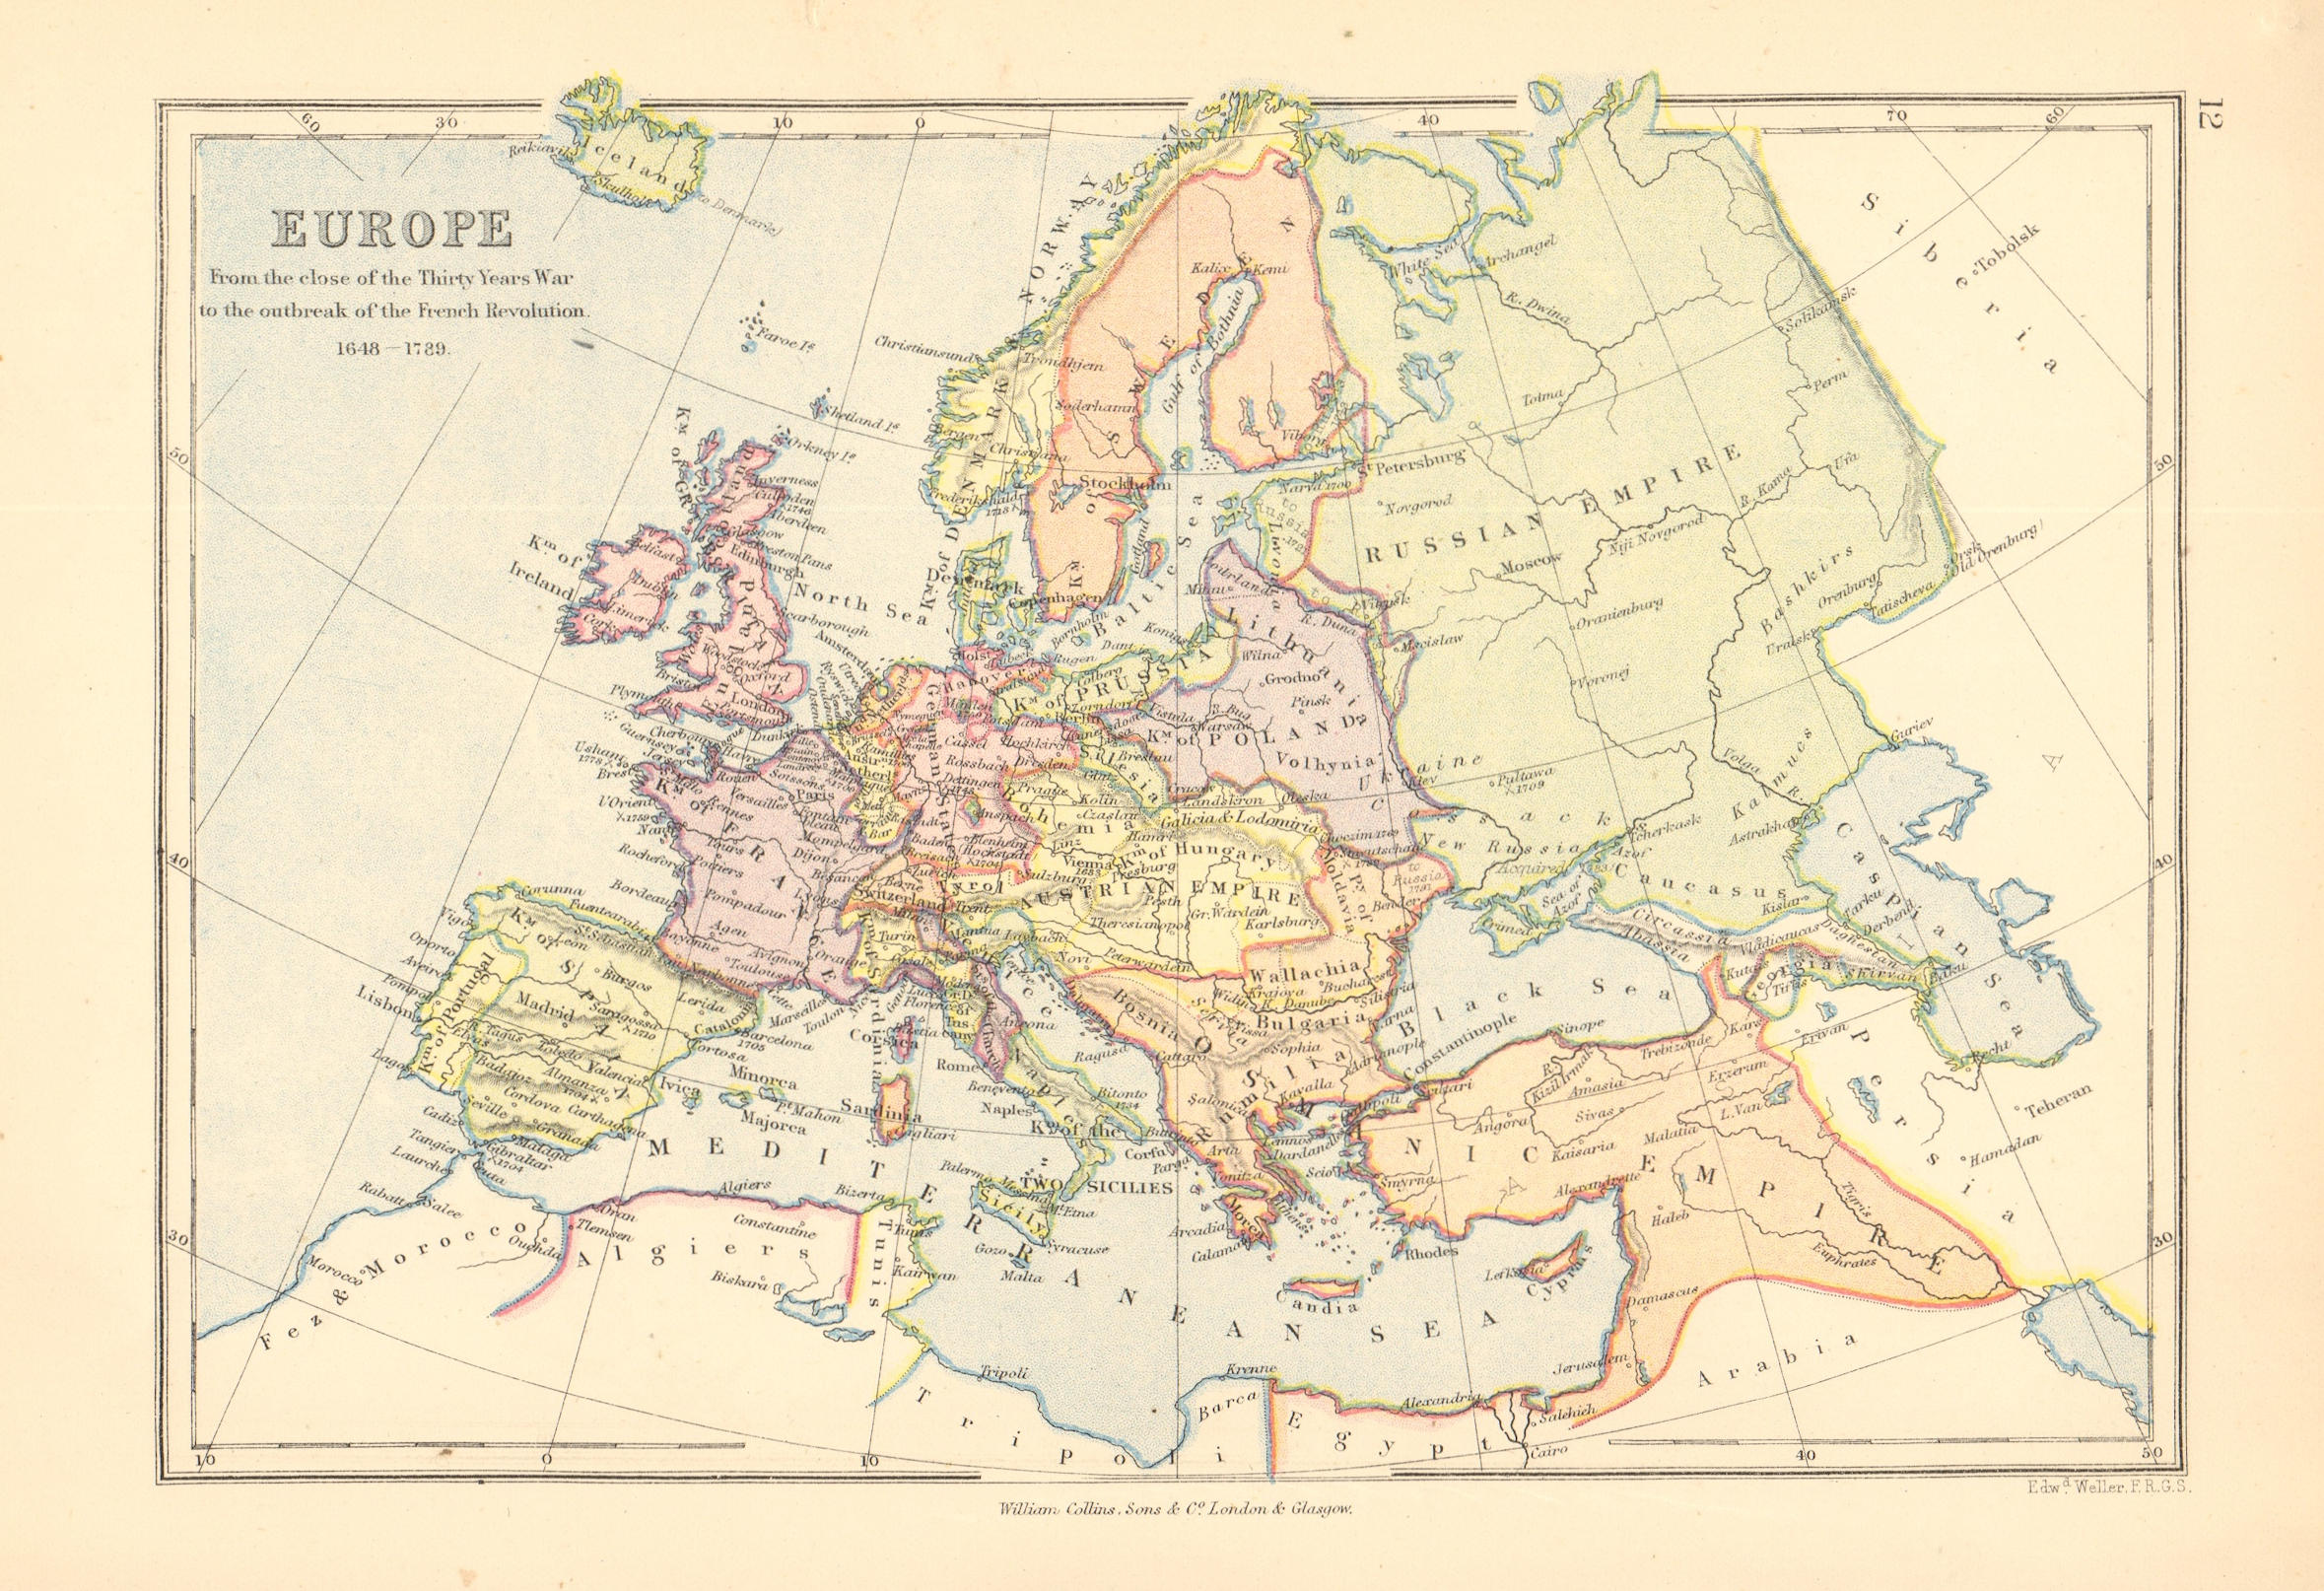 Associate Product EUROPE 1648-1789. End of the Thirty years war to the French Revolution 1876 map